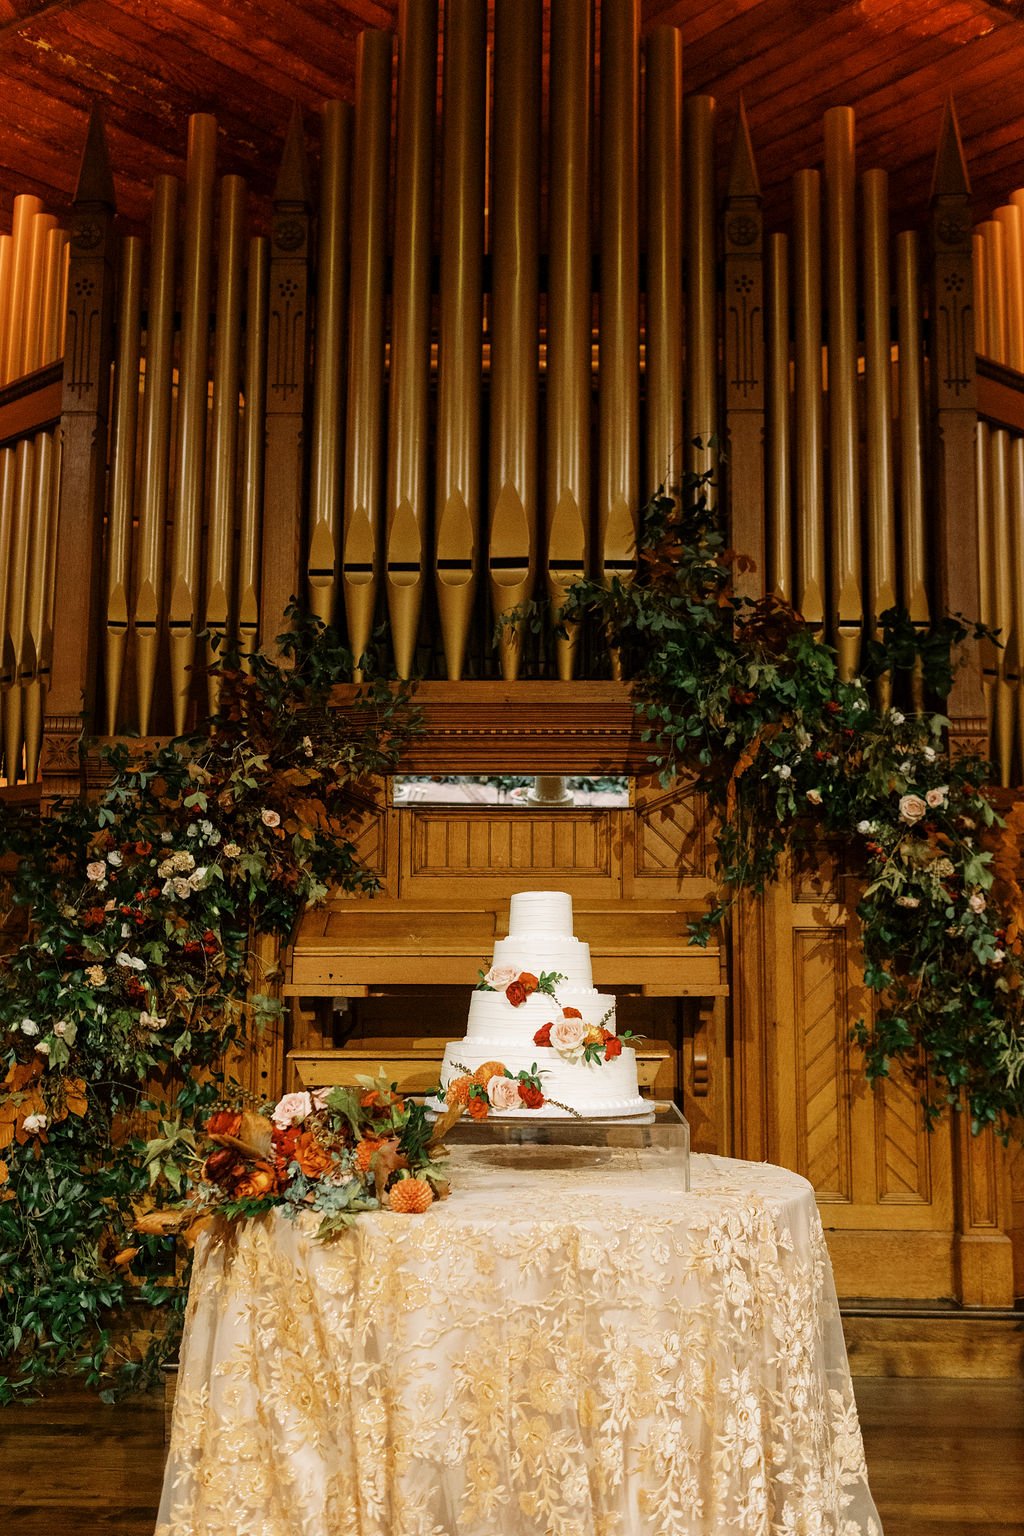 This romantic and organic wedding held at Clementine Hall was filled with fall textures in an autumnal color palette. Flowers included garden roses, dahlias, ranunculus and fall foliage. Floral Design by Rosemary and Finch in Nashville, TN.